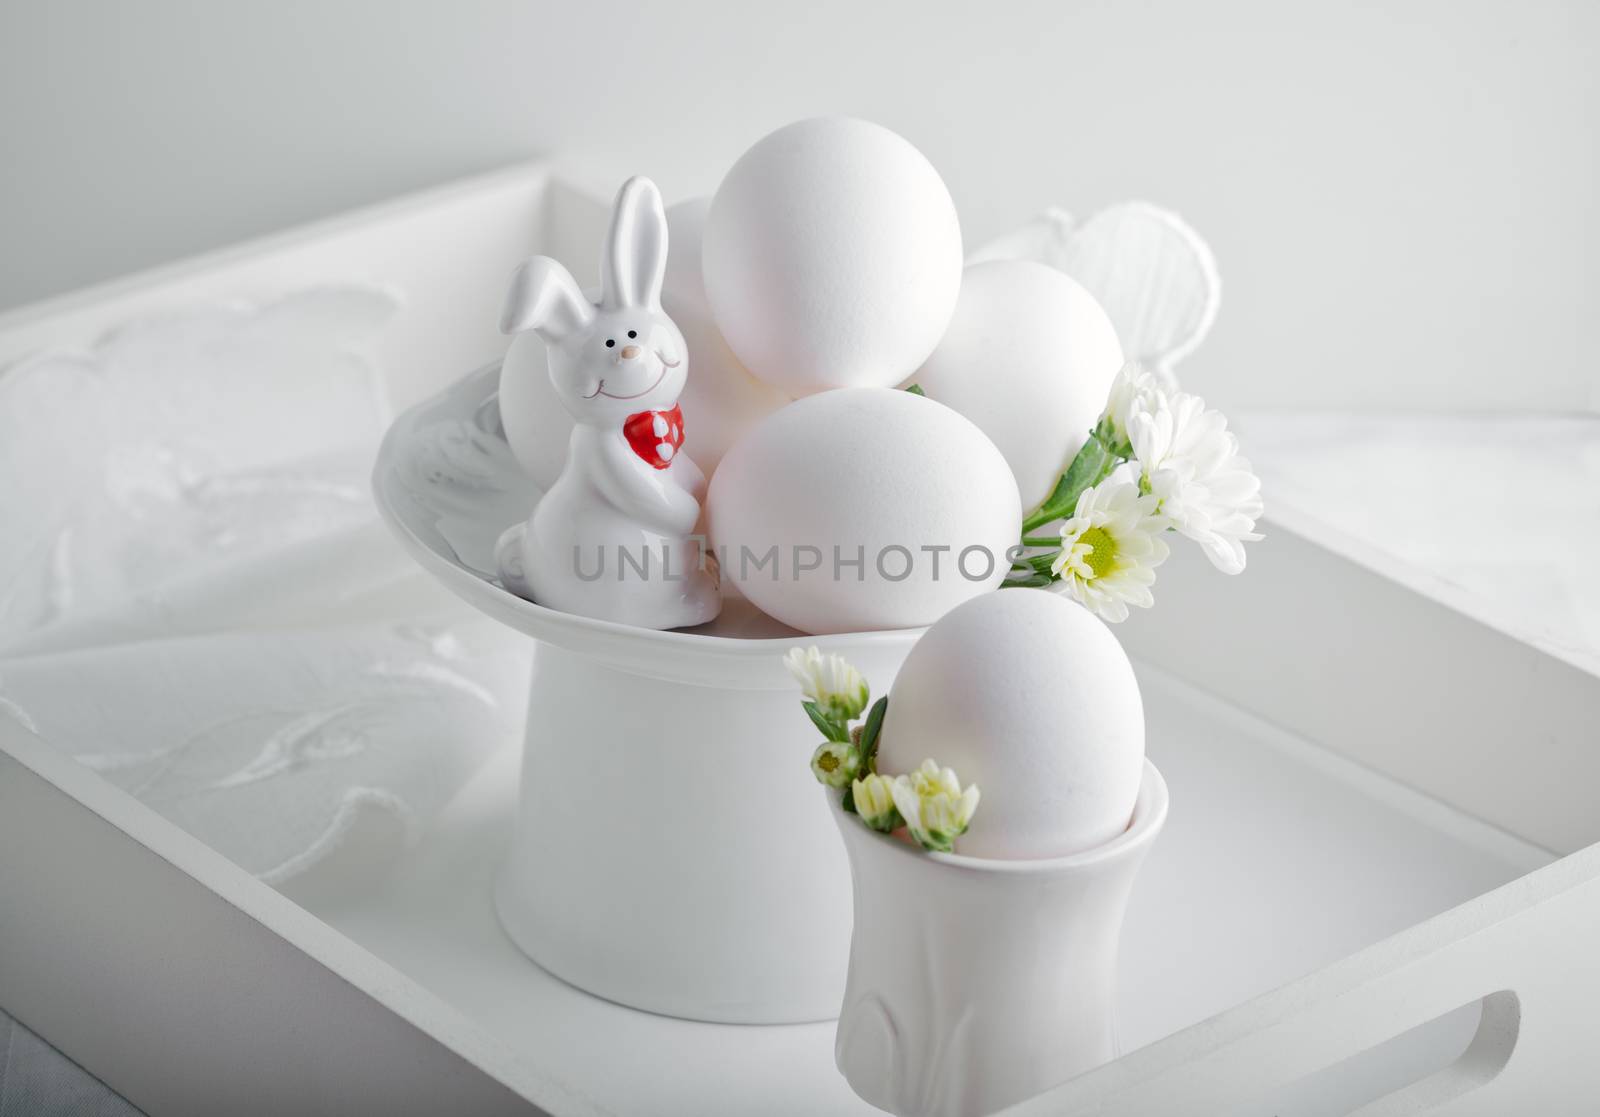 Eggs, rabbit and flowers on a white surface. Easter symbols